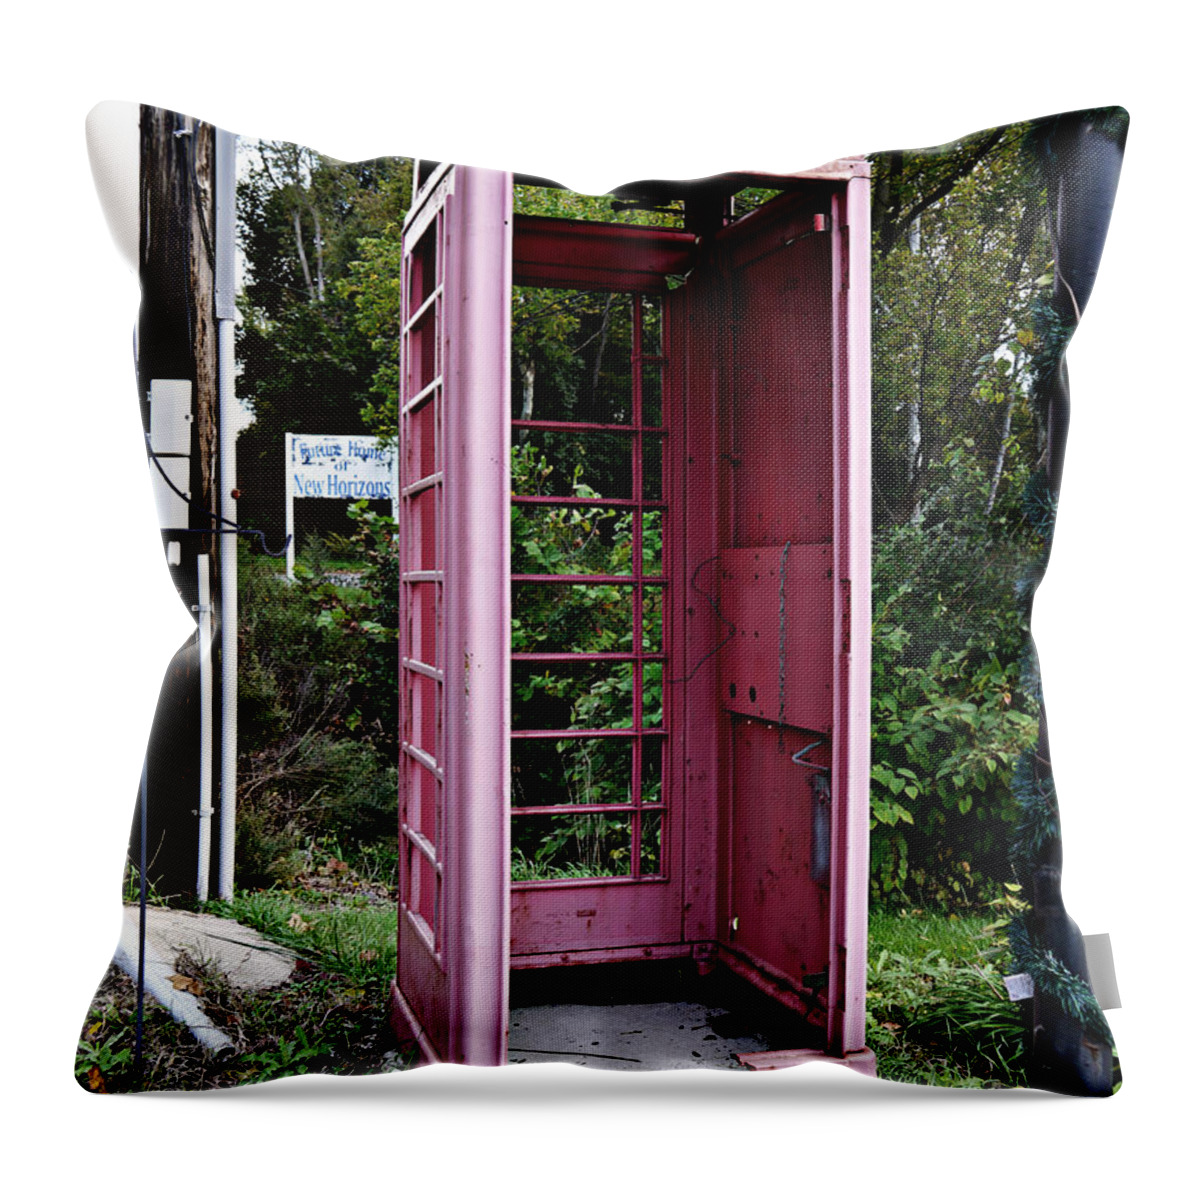 Richard Reeve Throw Pillow featuring the photograph No More Calls by Richard Reeve